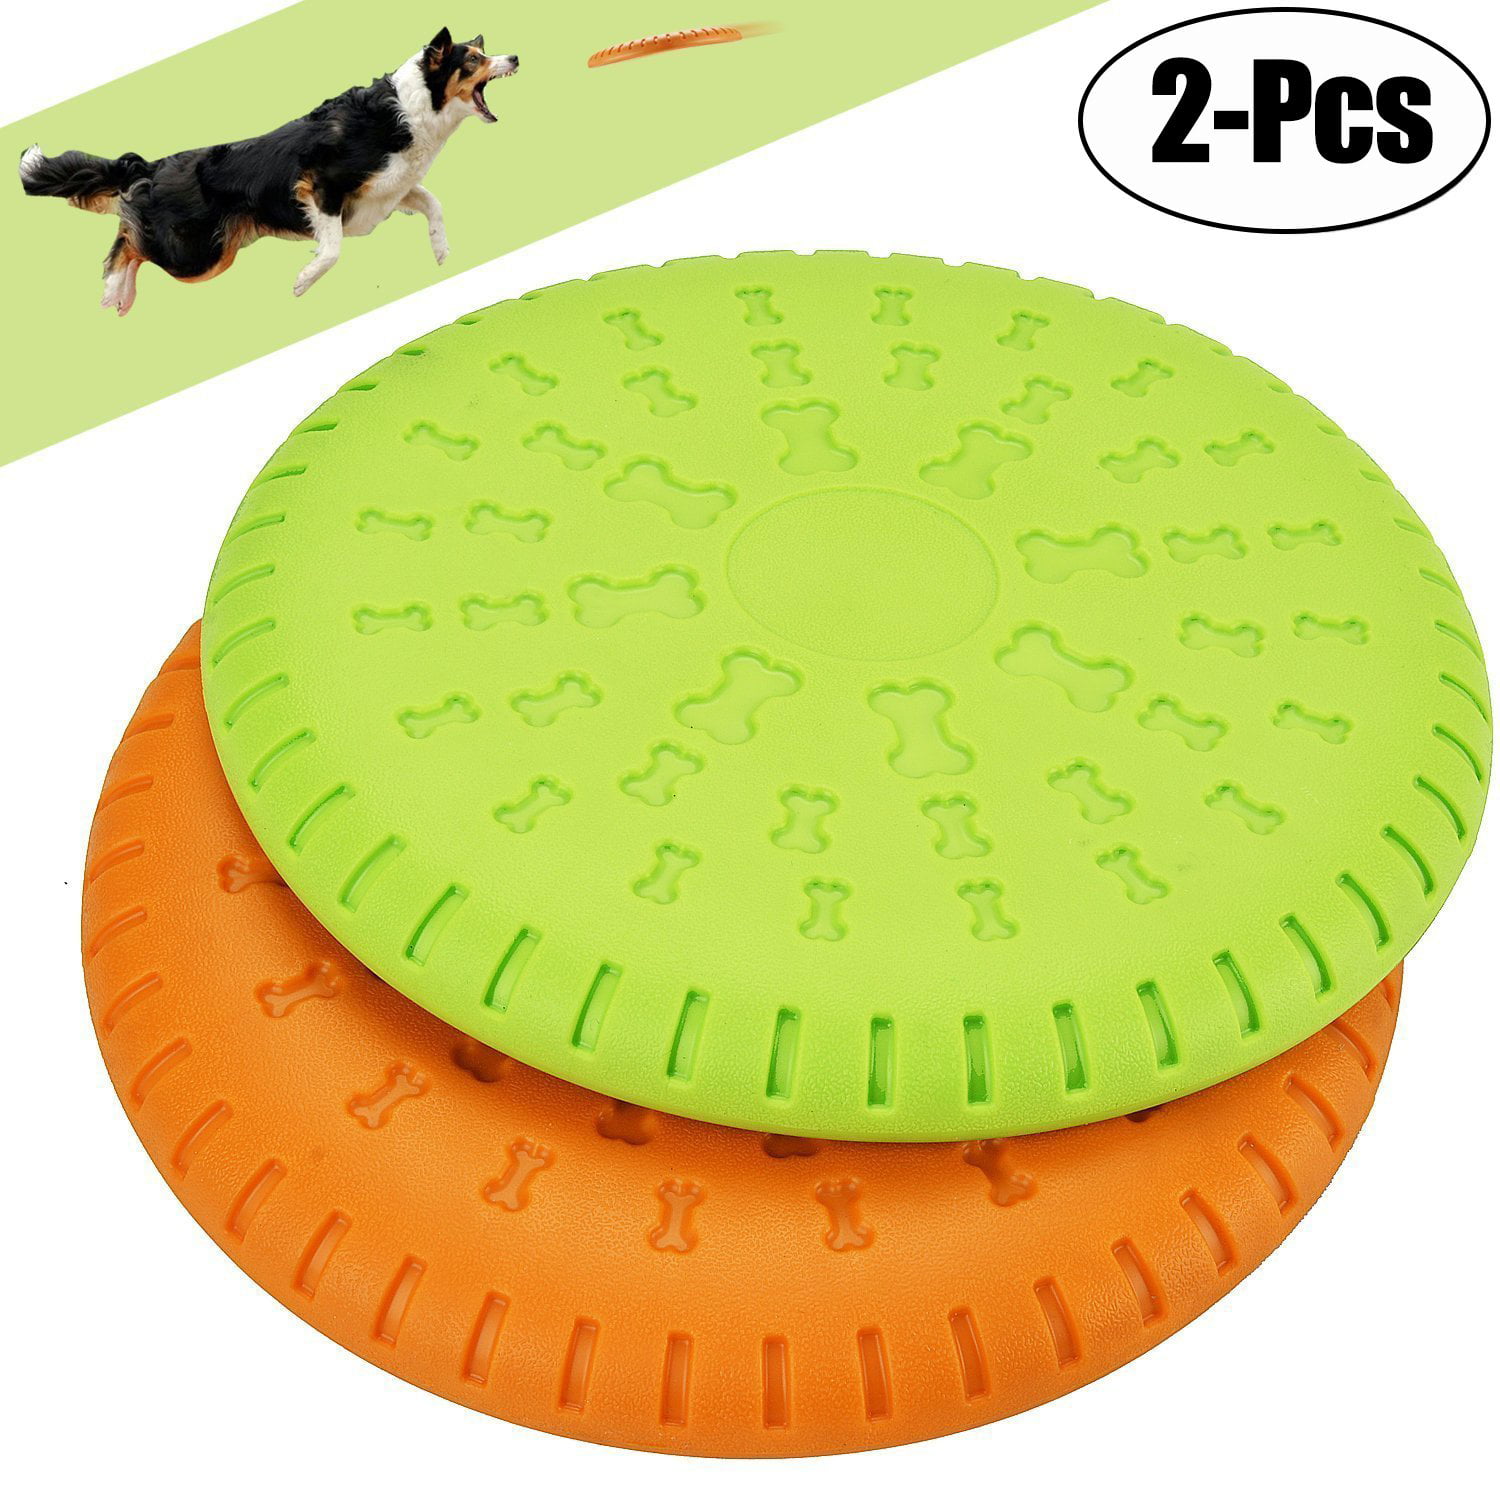 Forin Natural Silica Gel Material DogToys Flying Discs for Pet Training Interactive 